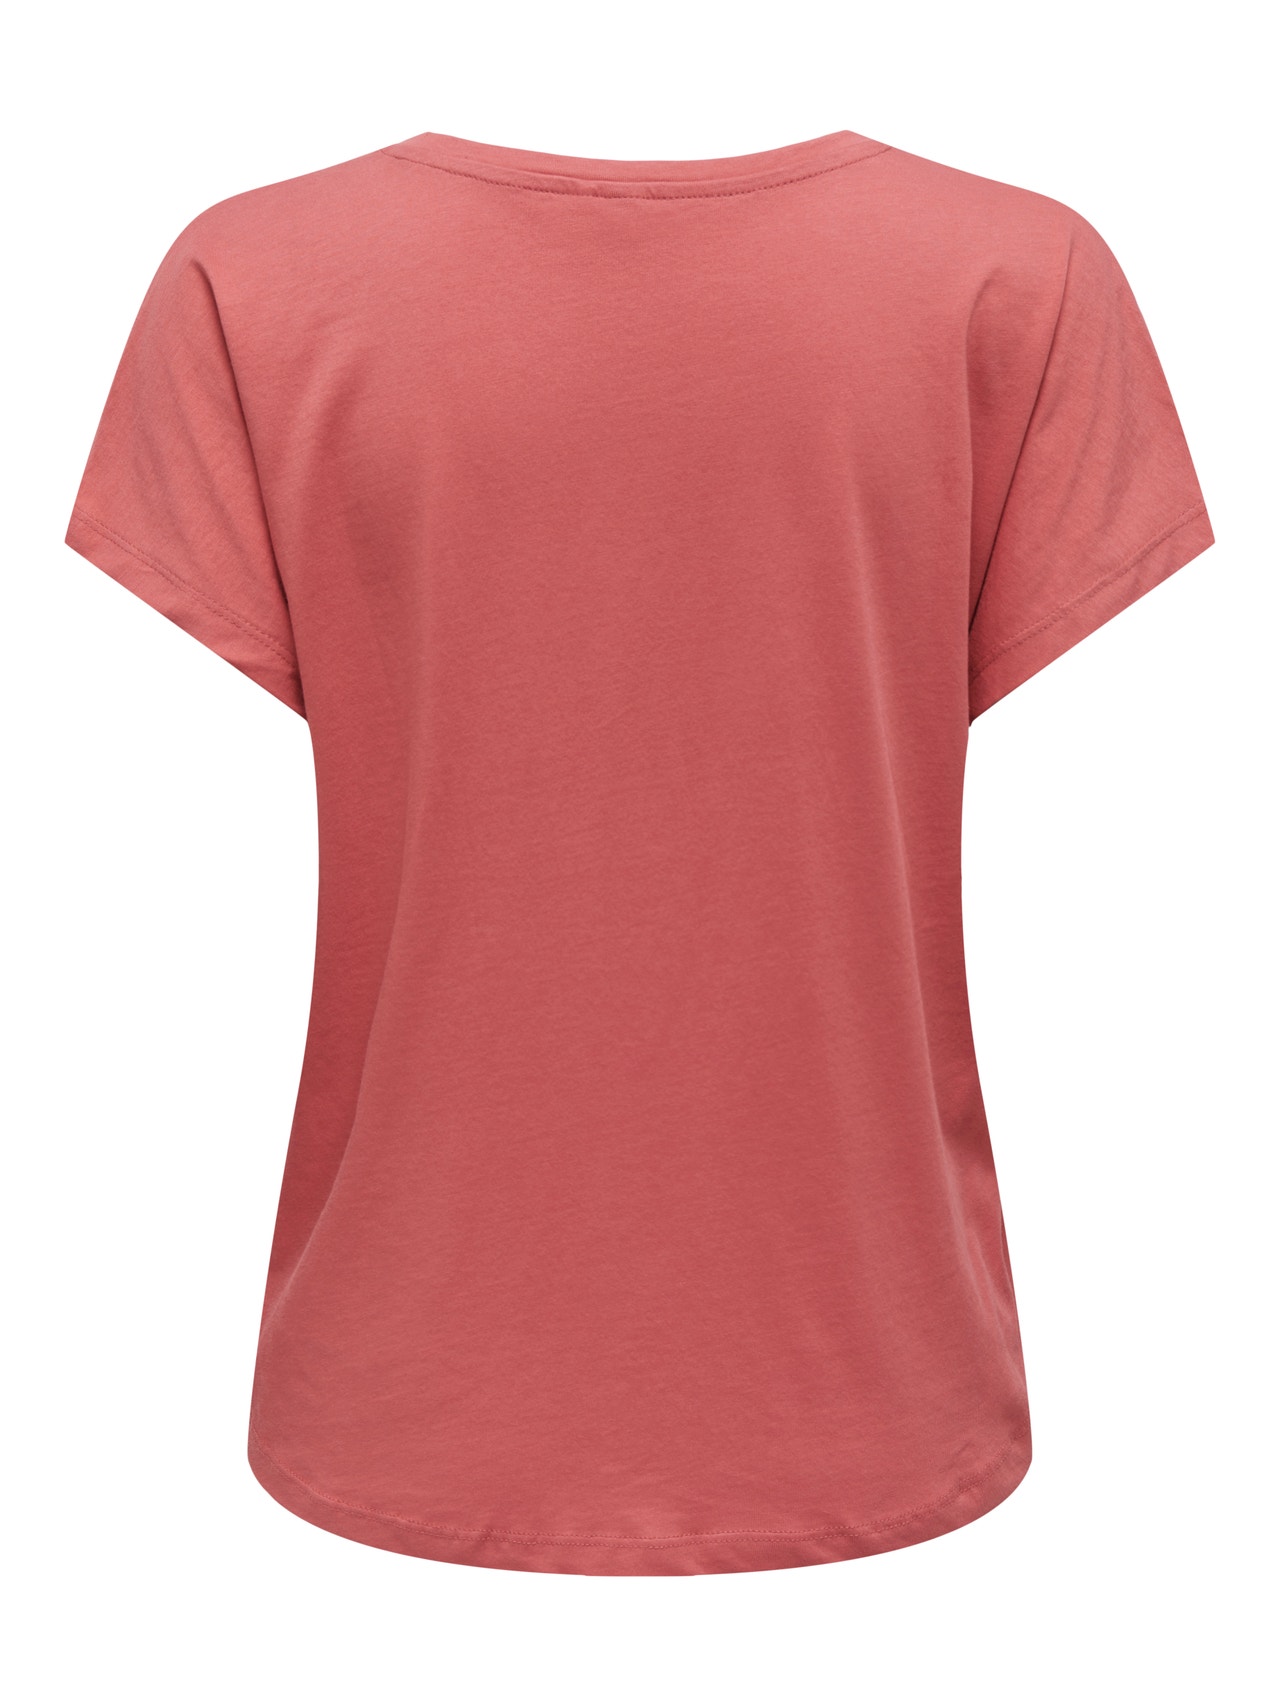 ONLY Training t-shirt with print -Mineral Red - 15297020